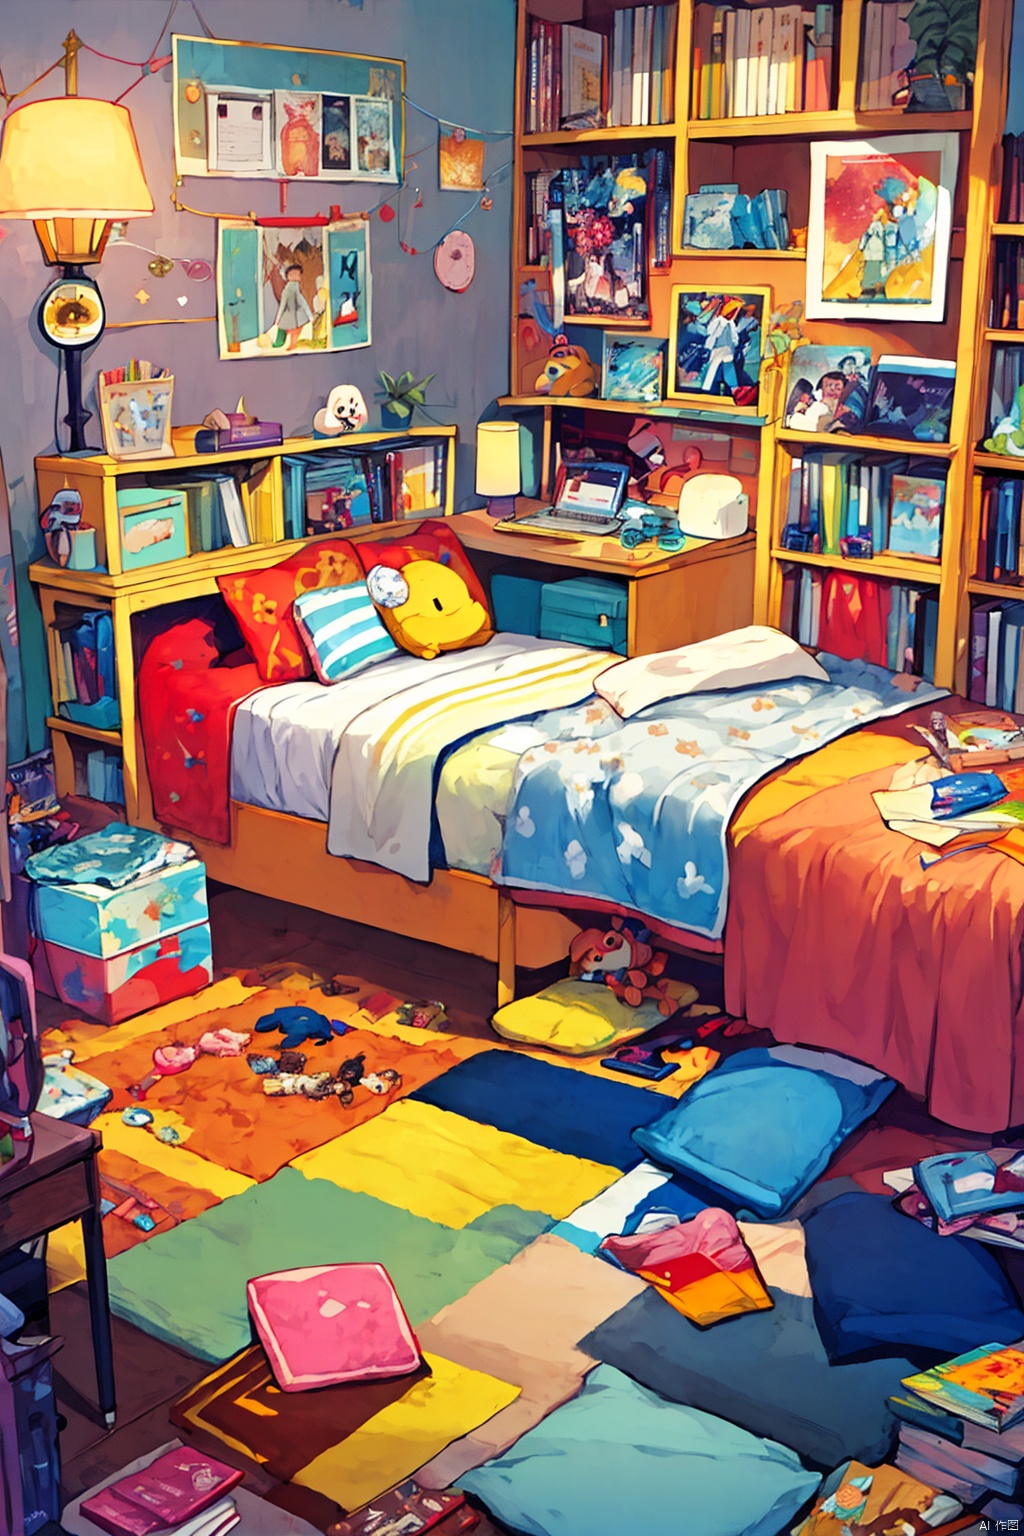 (masterpiece, best quality, official art), ultra-detailed, illustration, 1 girl, sitting, playful, gaming, messy room, teenage, 15 years old, lighthearted, cozy, relaxed, cheerful, fondness, love, friendship, cute, touching, computer game, controllers, smiles, joy, laughter, comfortable, slippers, pajamas, messy hair, tousled, disarray, cluttered, toys, posters, pillows, blankets, lamp, desk, chair, cozy atmosphere, warm lighting, bright colors, soft pastels, flowers, plants, books, headphones, snacks, soda, energy drinks, manga, novels, plushies, figurines, posters, pictures, posters, wall scrolls, stickers, decorations, bed, blankets, pillows, stuffed animals, cozy blankets, warm blankets, comfortable clothes, casual attire, leisure wear, sweatshirt, sweatpants, shorts, t-shirt, **** top, socks, Light-electric style